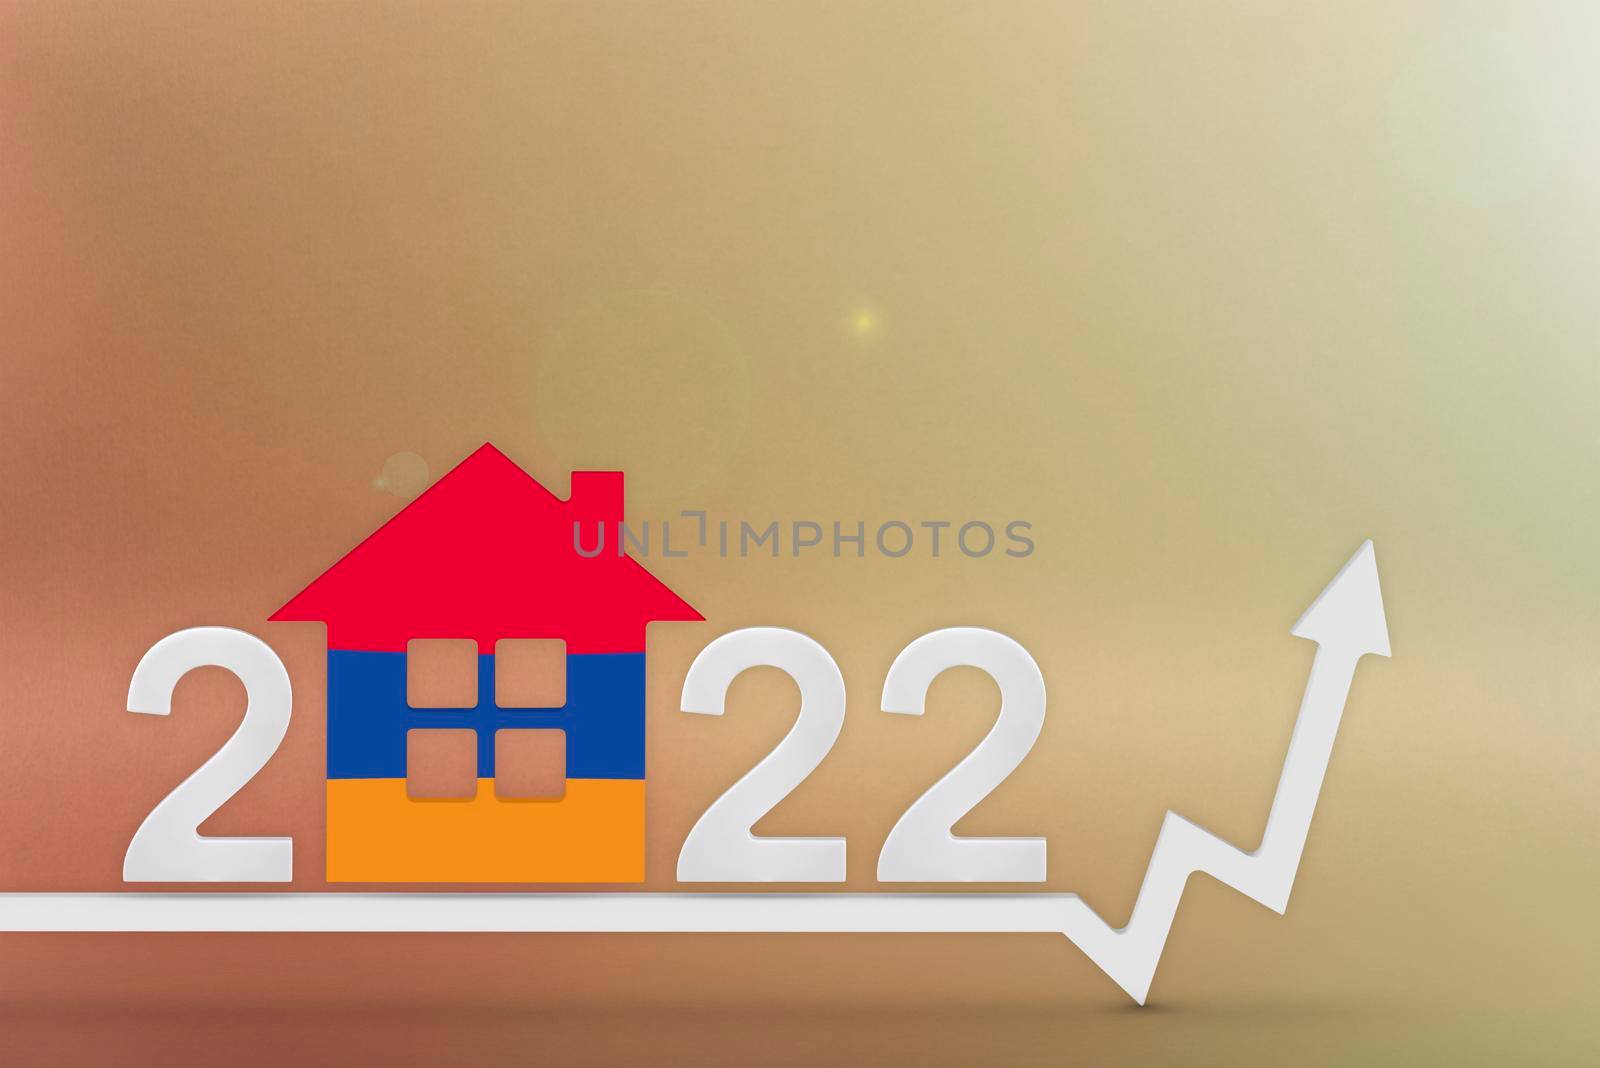 The cost of real estate in Armenia in 2022. Rising cost of construction, insurance, rent in Armenia. House model painted in flag colors, up arrow on yellow background.